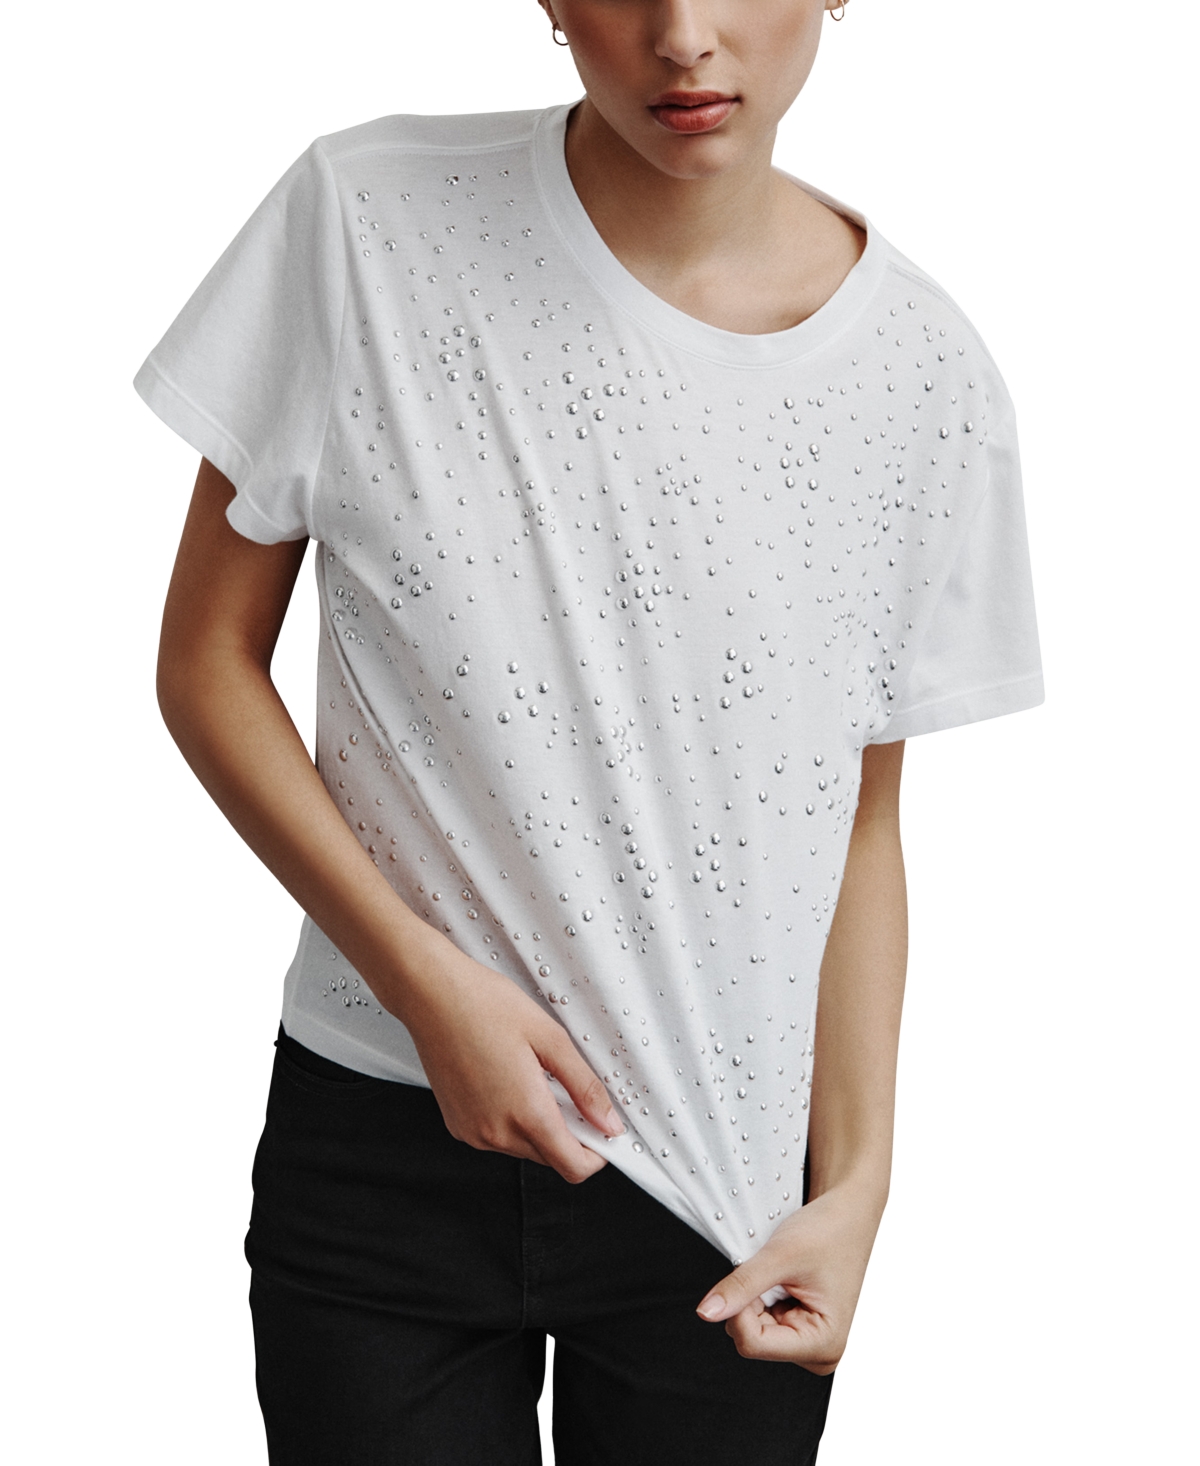 Women's Scattered-Dome-Studs Boxy T-Shirt - Wtl - Wht/silver